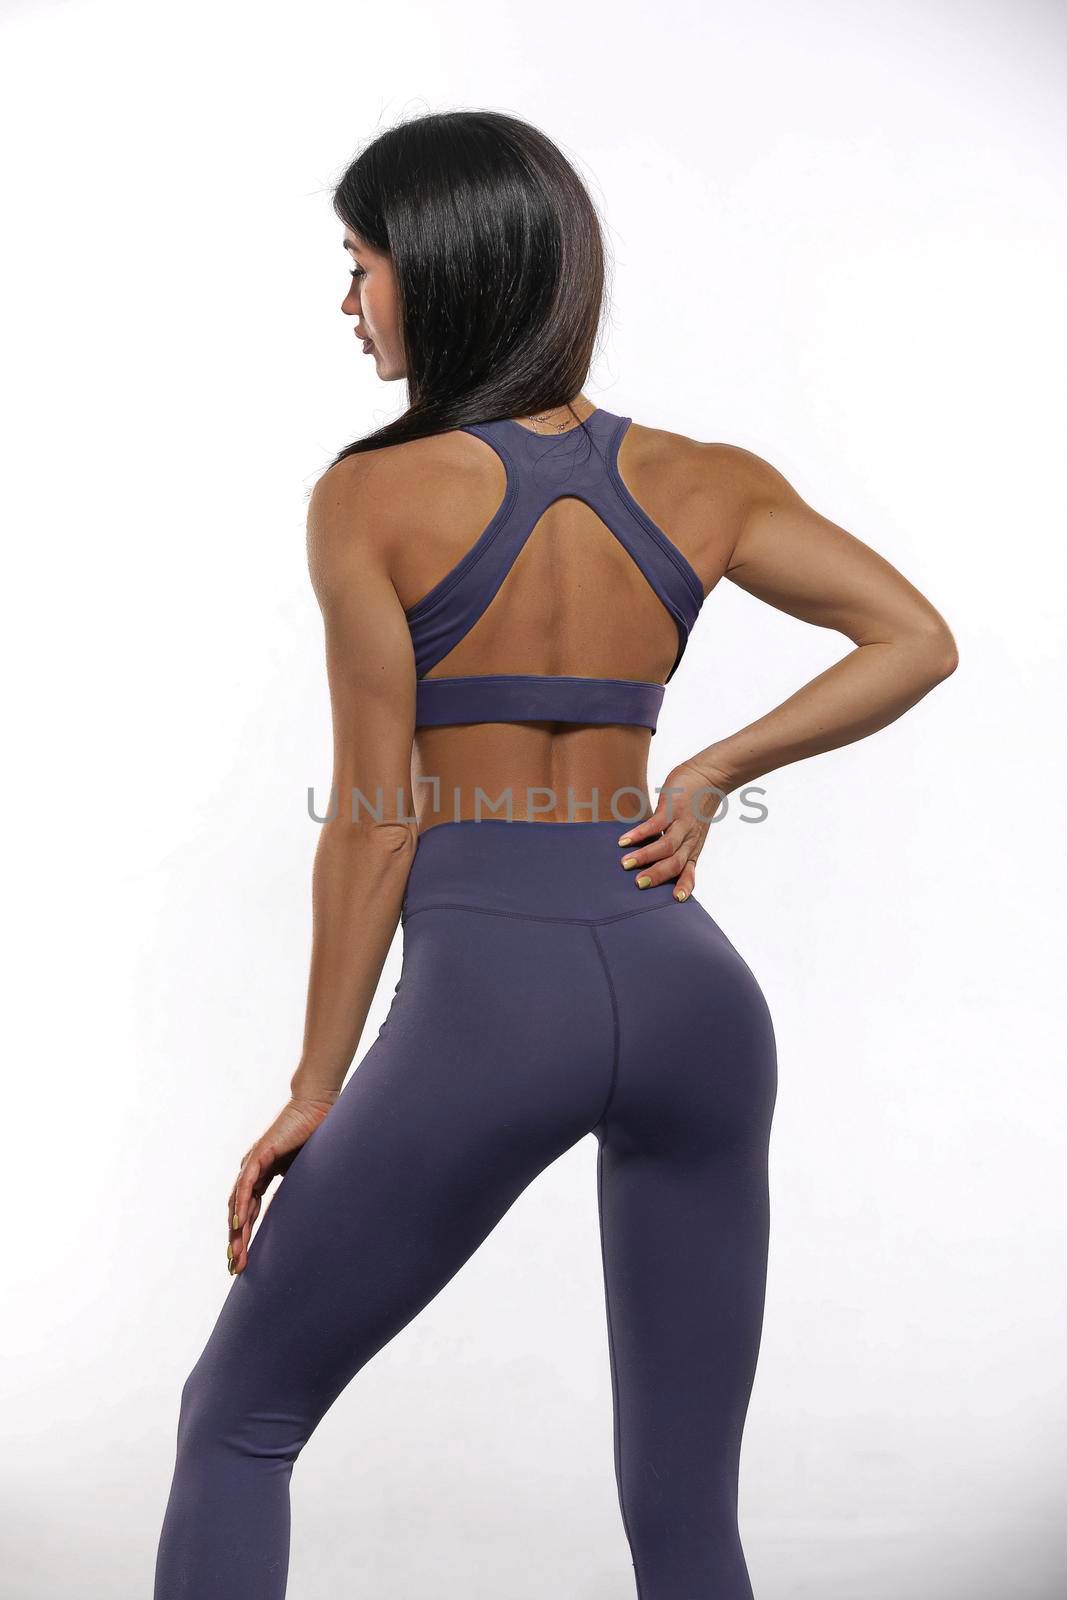 girl in purple leggings and top stay back on a white background by but_photo